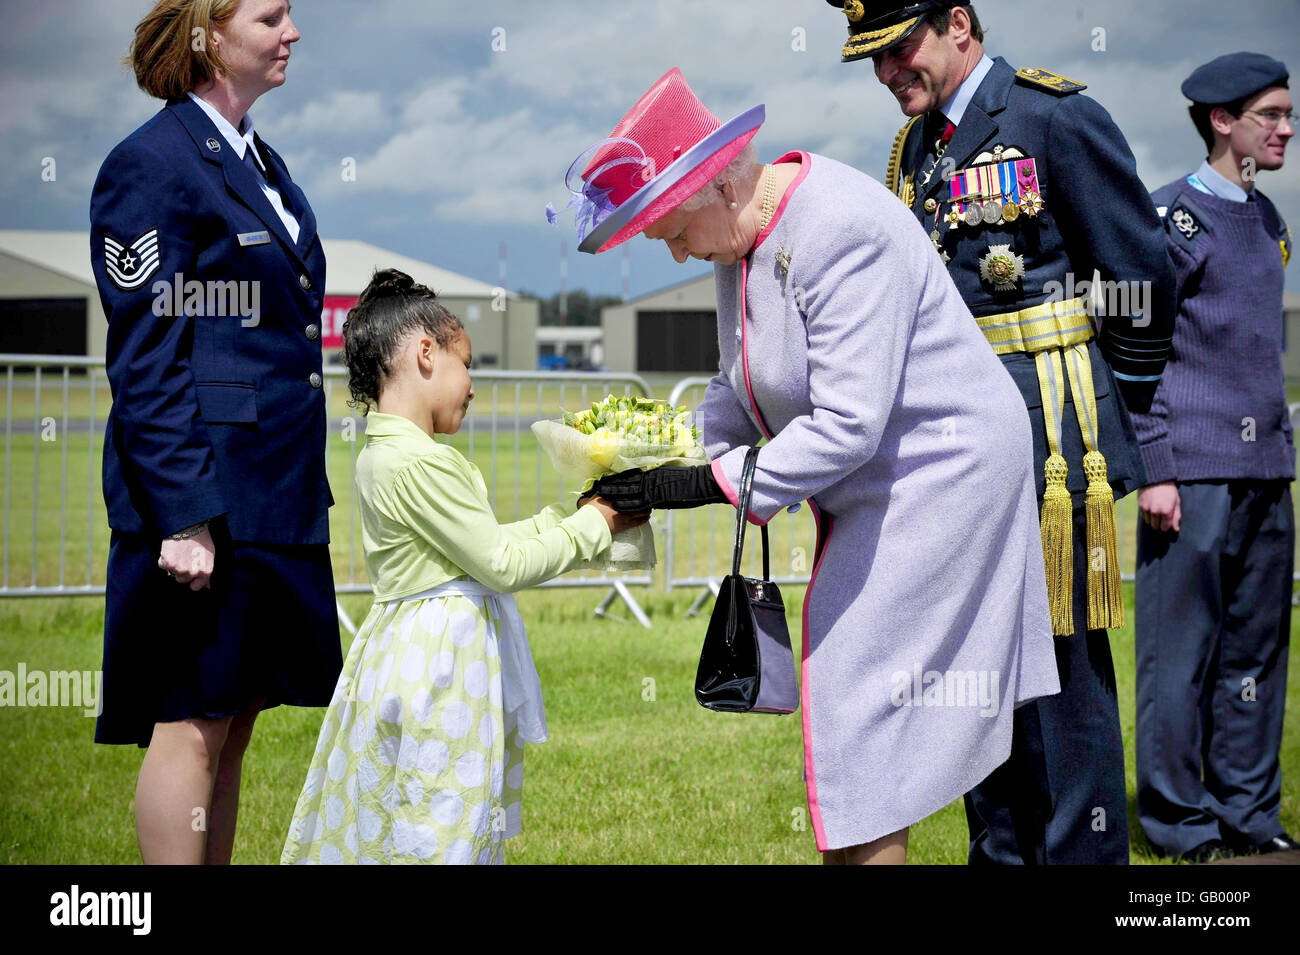 Britain's Queen Elizabeth II accepts flowers from Soleece Anabwani, 6, at RAF Fairford, after presenting new Queen's Colours jointly to the RAF in the United Kingdom and the Royal Air Force Regiment, at the opening of the Royal International Air Tattoo. Stock Photo